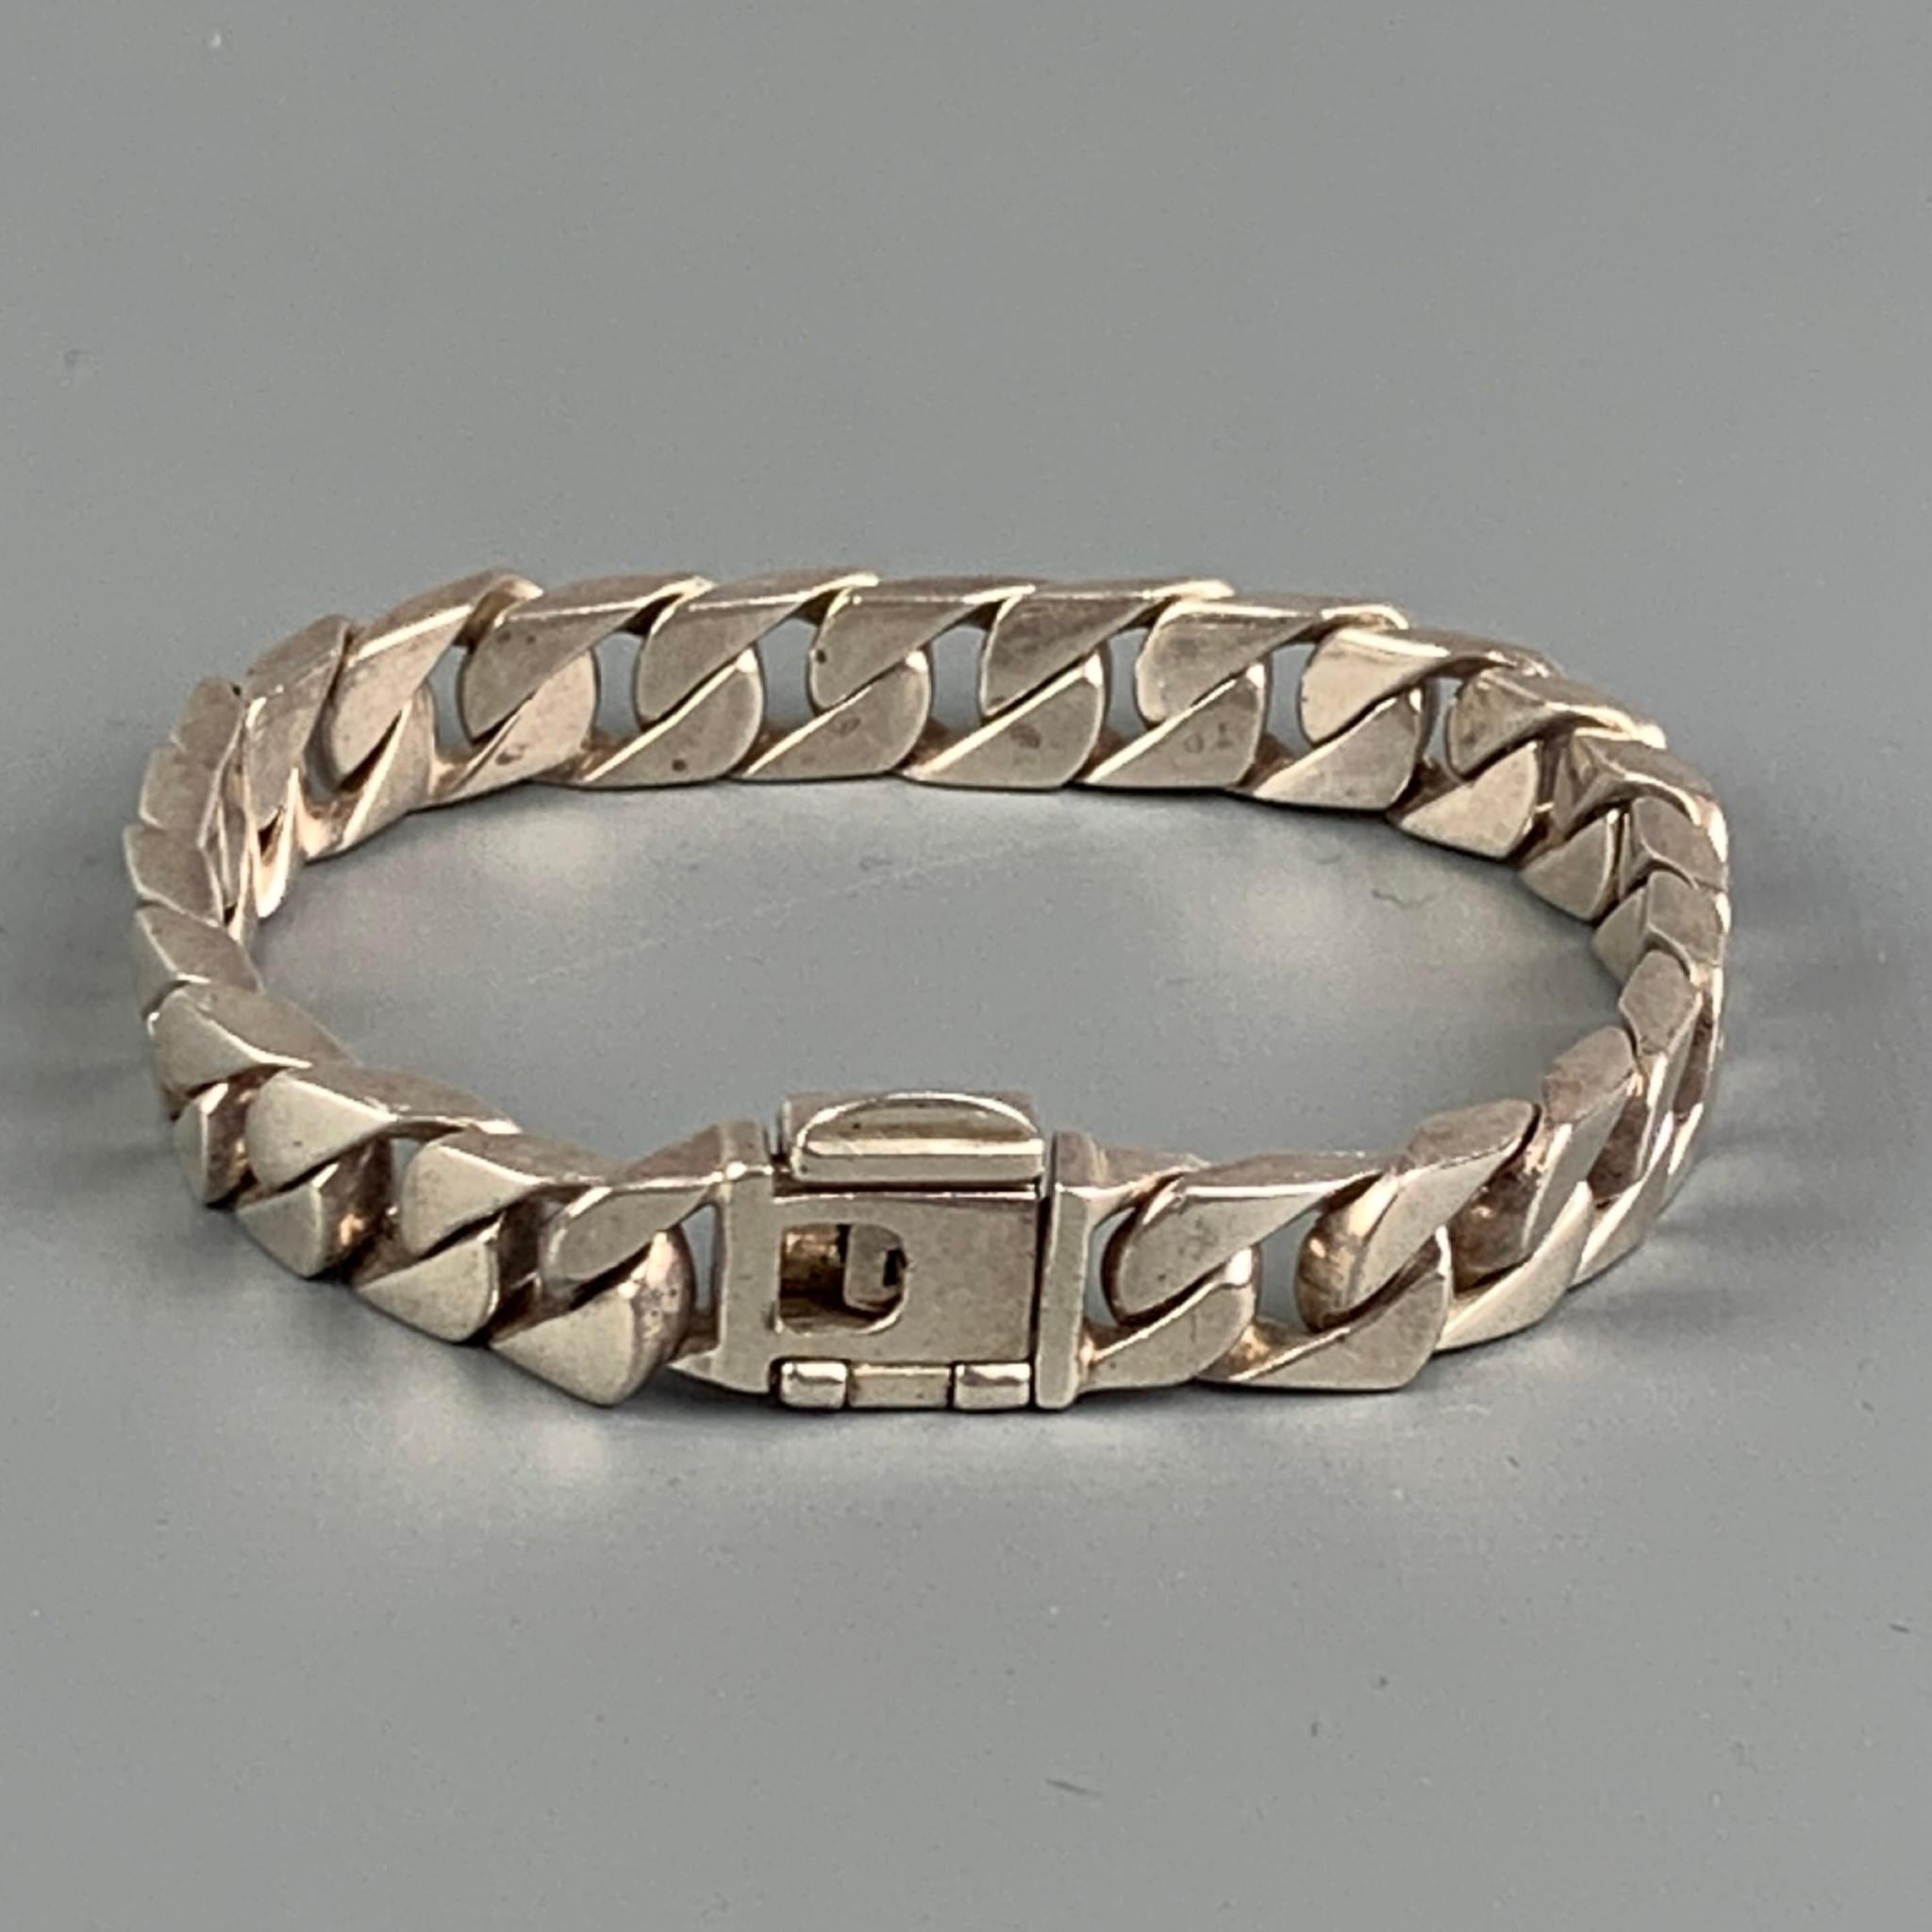 TIFFANY & CO. curb link bracelet comes in a sterling silver featuring a clasp closure. Includes pouch. Made in Italy. 

Very Good Pre-Owned Condition.

Measurements:

Length: 7.5 in. 
Width: 0.5 in. 